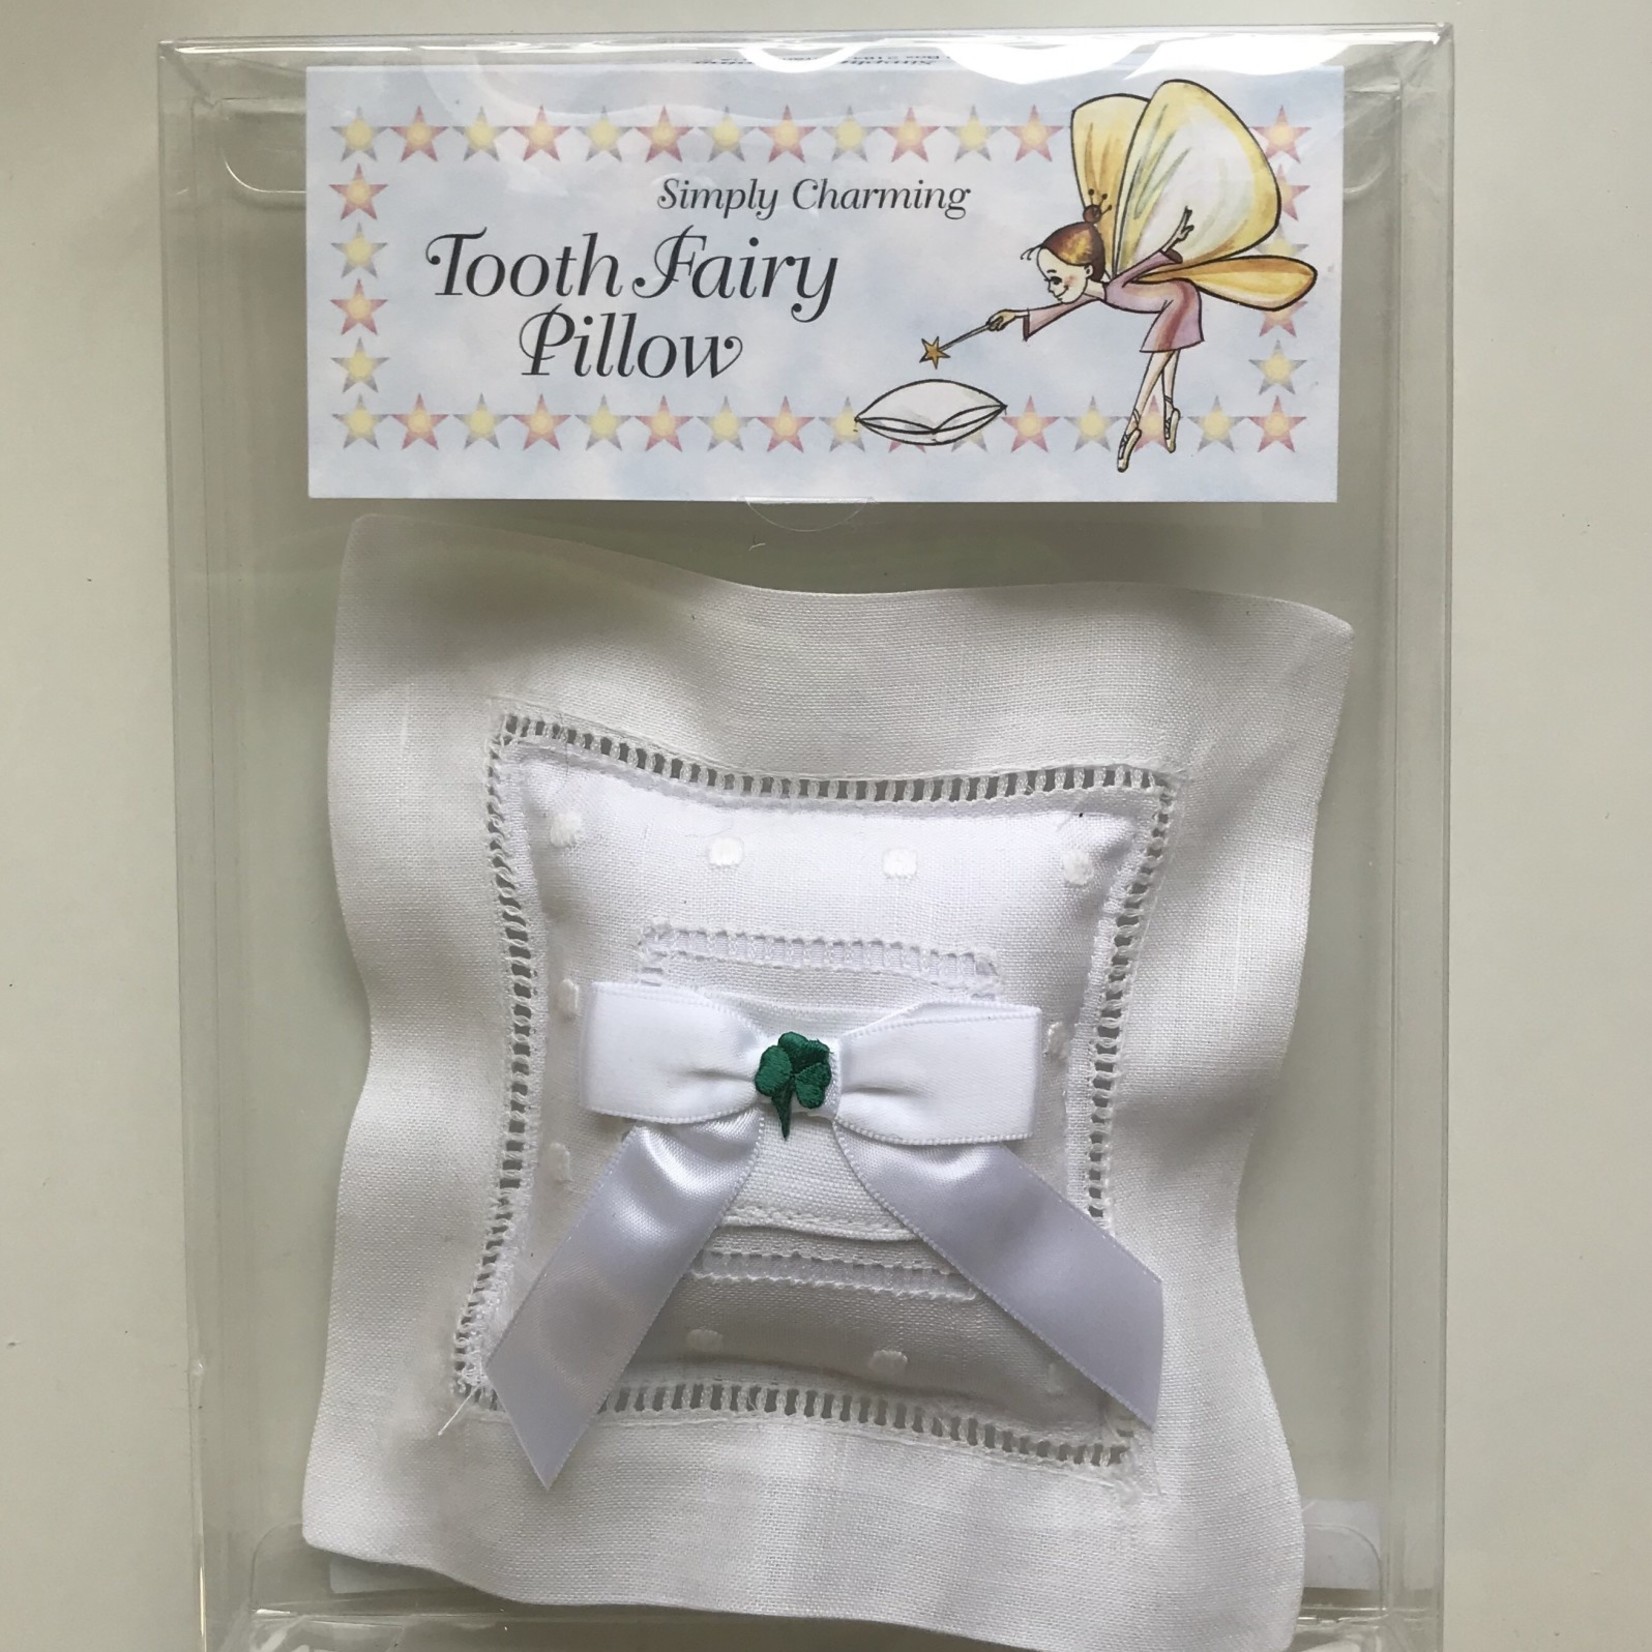 Simply Charming Tooth Fairy Pillow with Shamrock